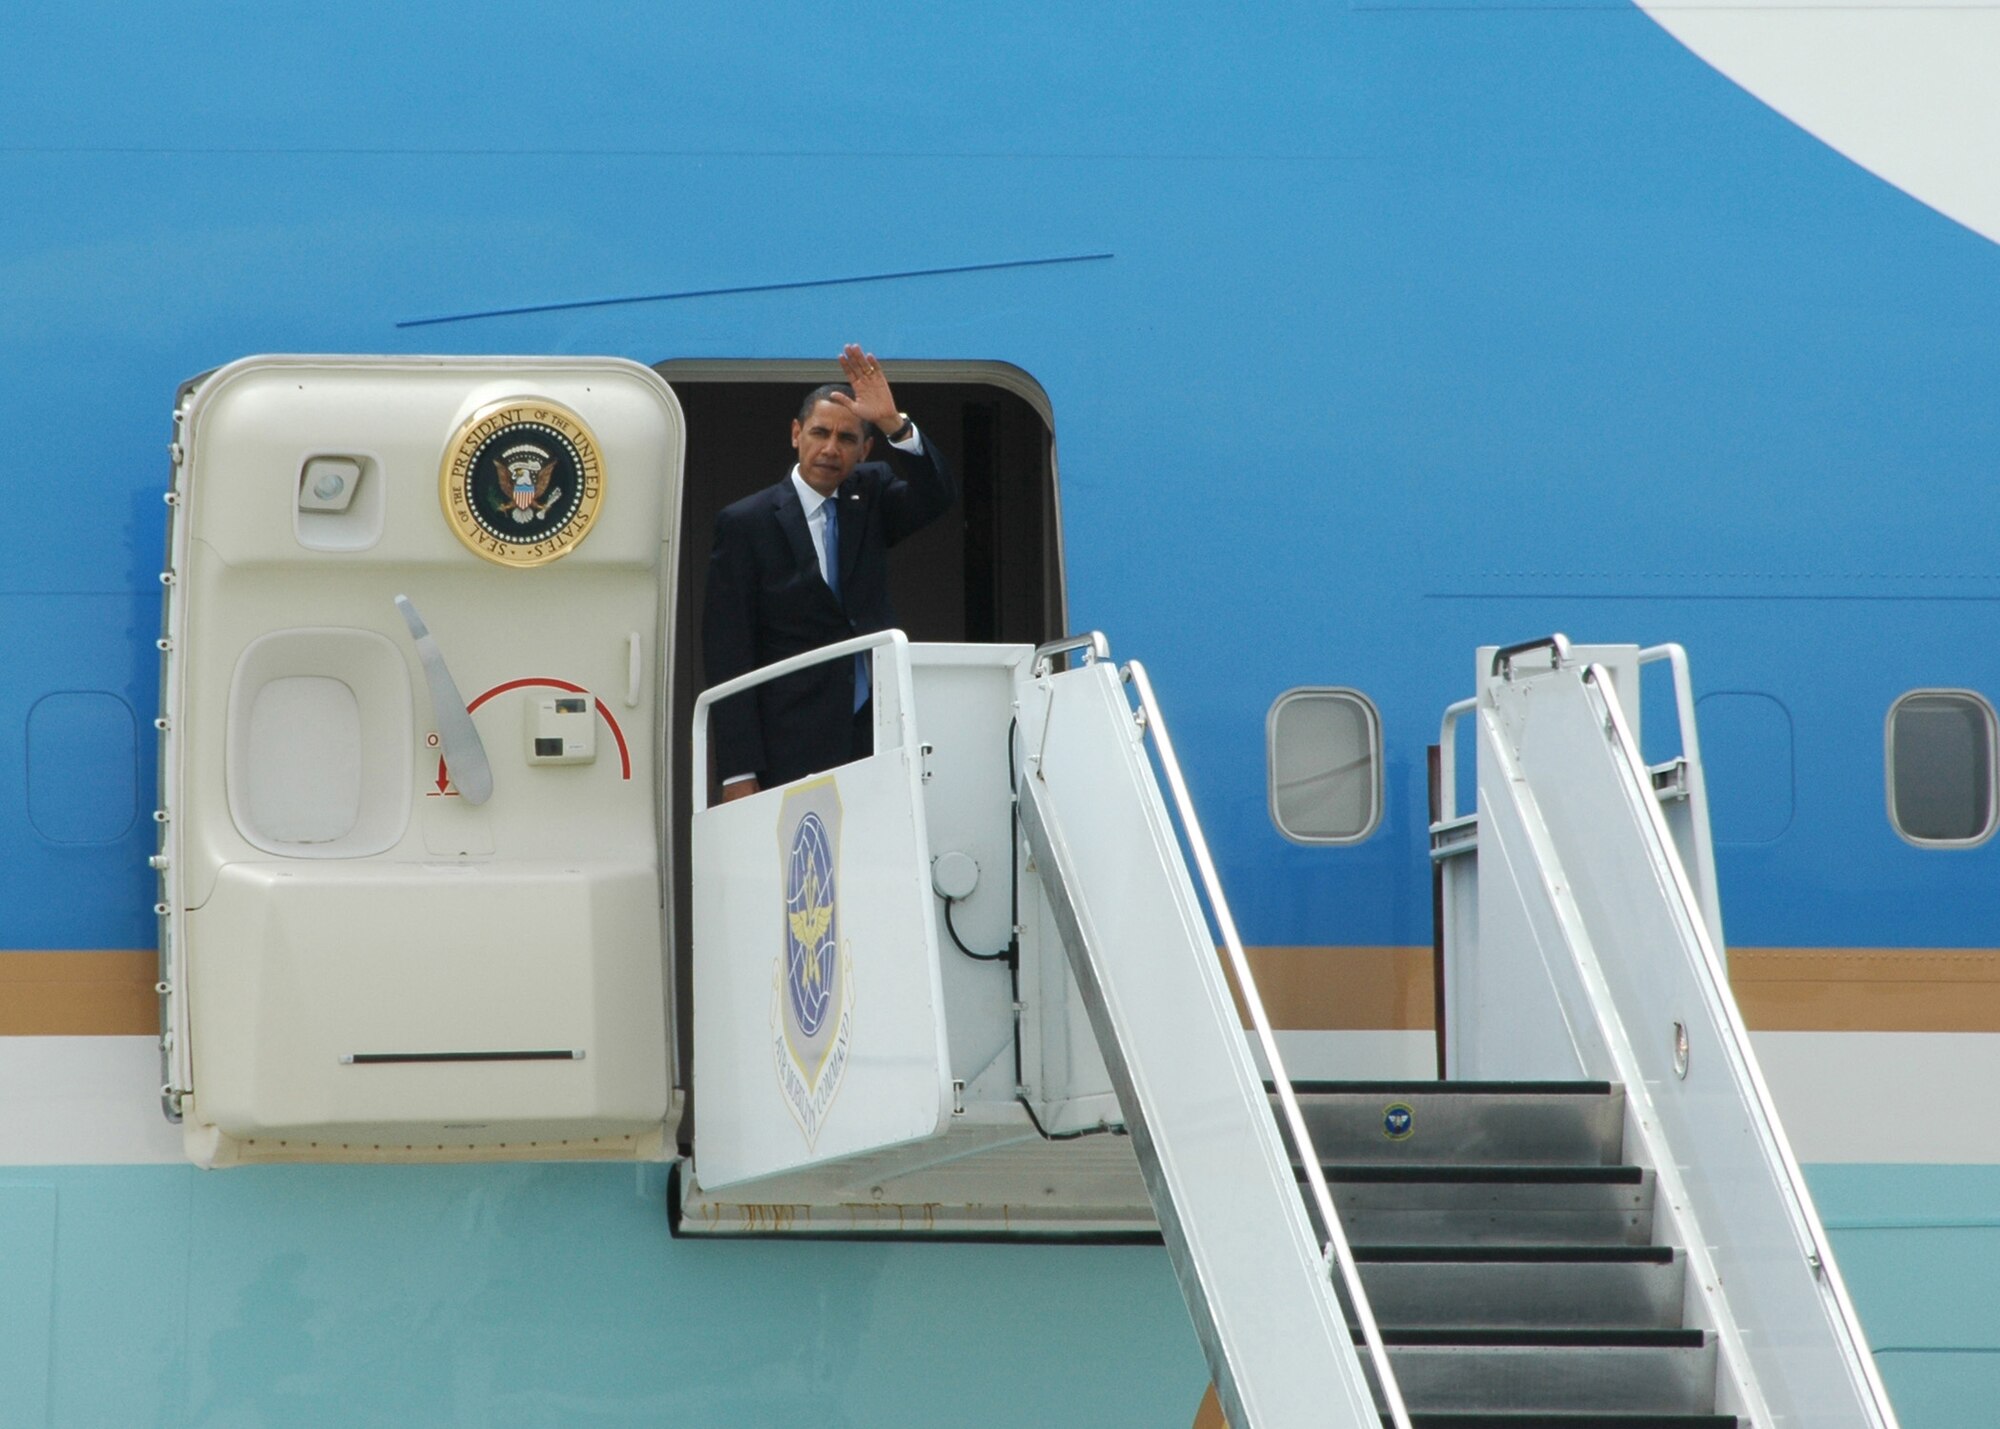 President Barack Obama waves from the door of Air Force One to members of the 131st Fighter Wing, Missouri Air National Guard, at Lambert-Saint Louis International Airport on April 29.  President Obama marked his 100th day in office with a Town Hall Meeting in Arnold, a surburb of Saint Louis, earlier that day. (U.S. Air Force Photo by Master Sergeant Mary-Dale Amison)  (RELEASED)